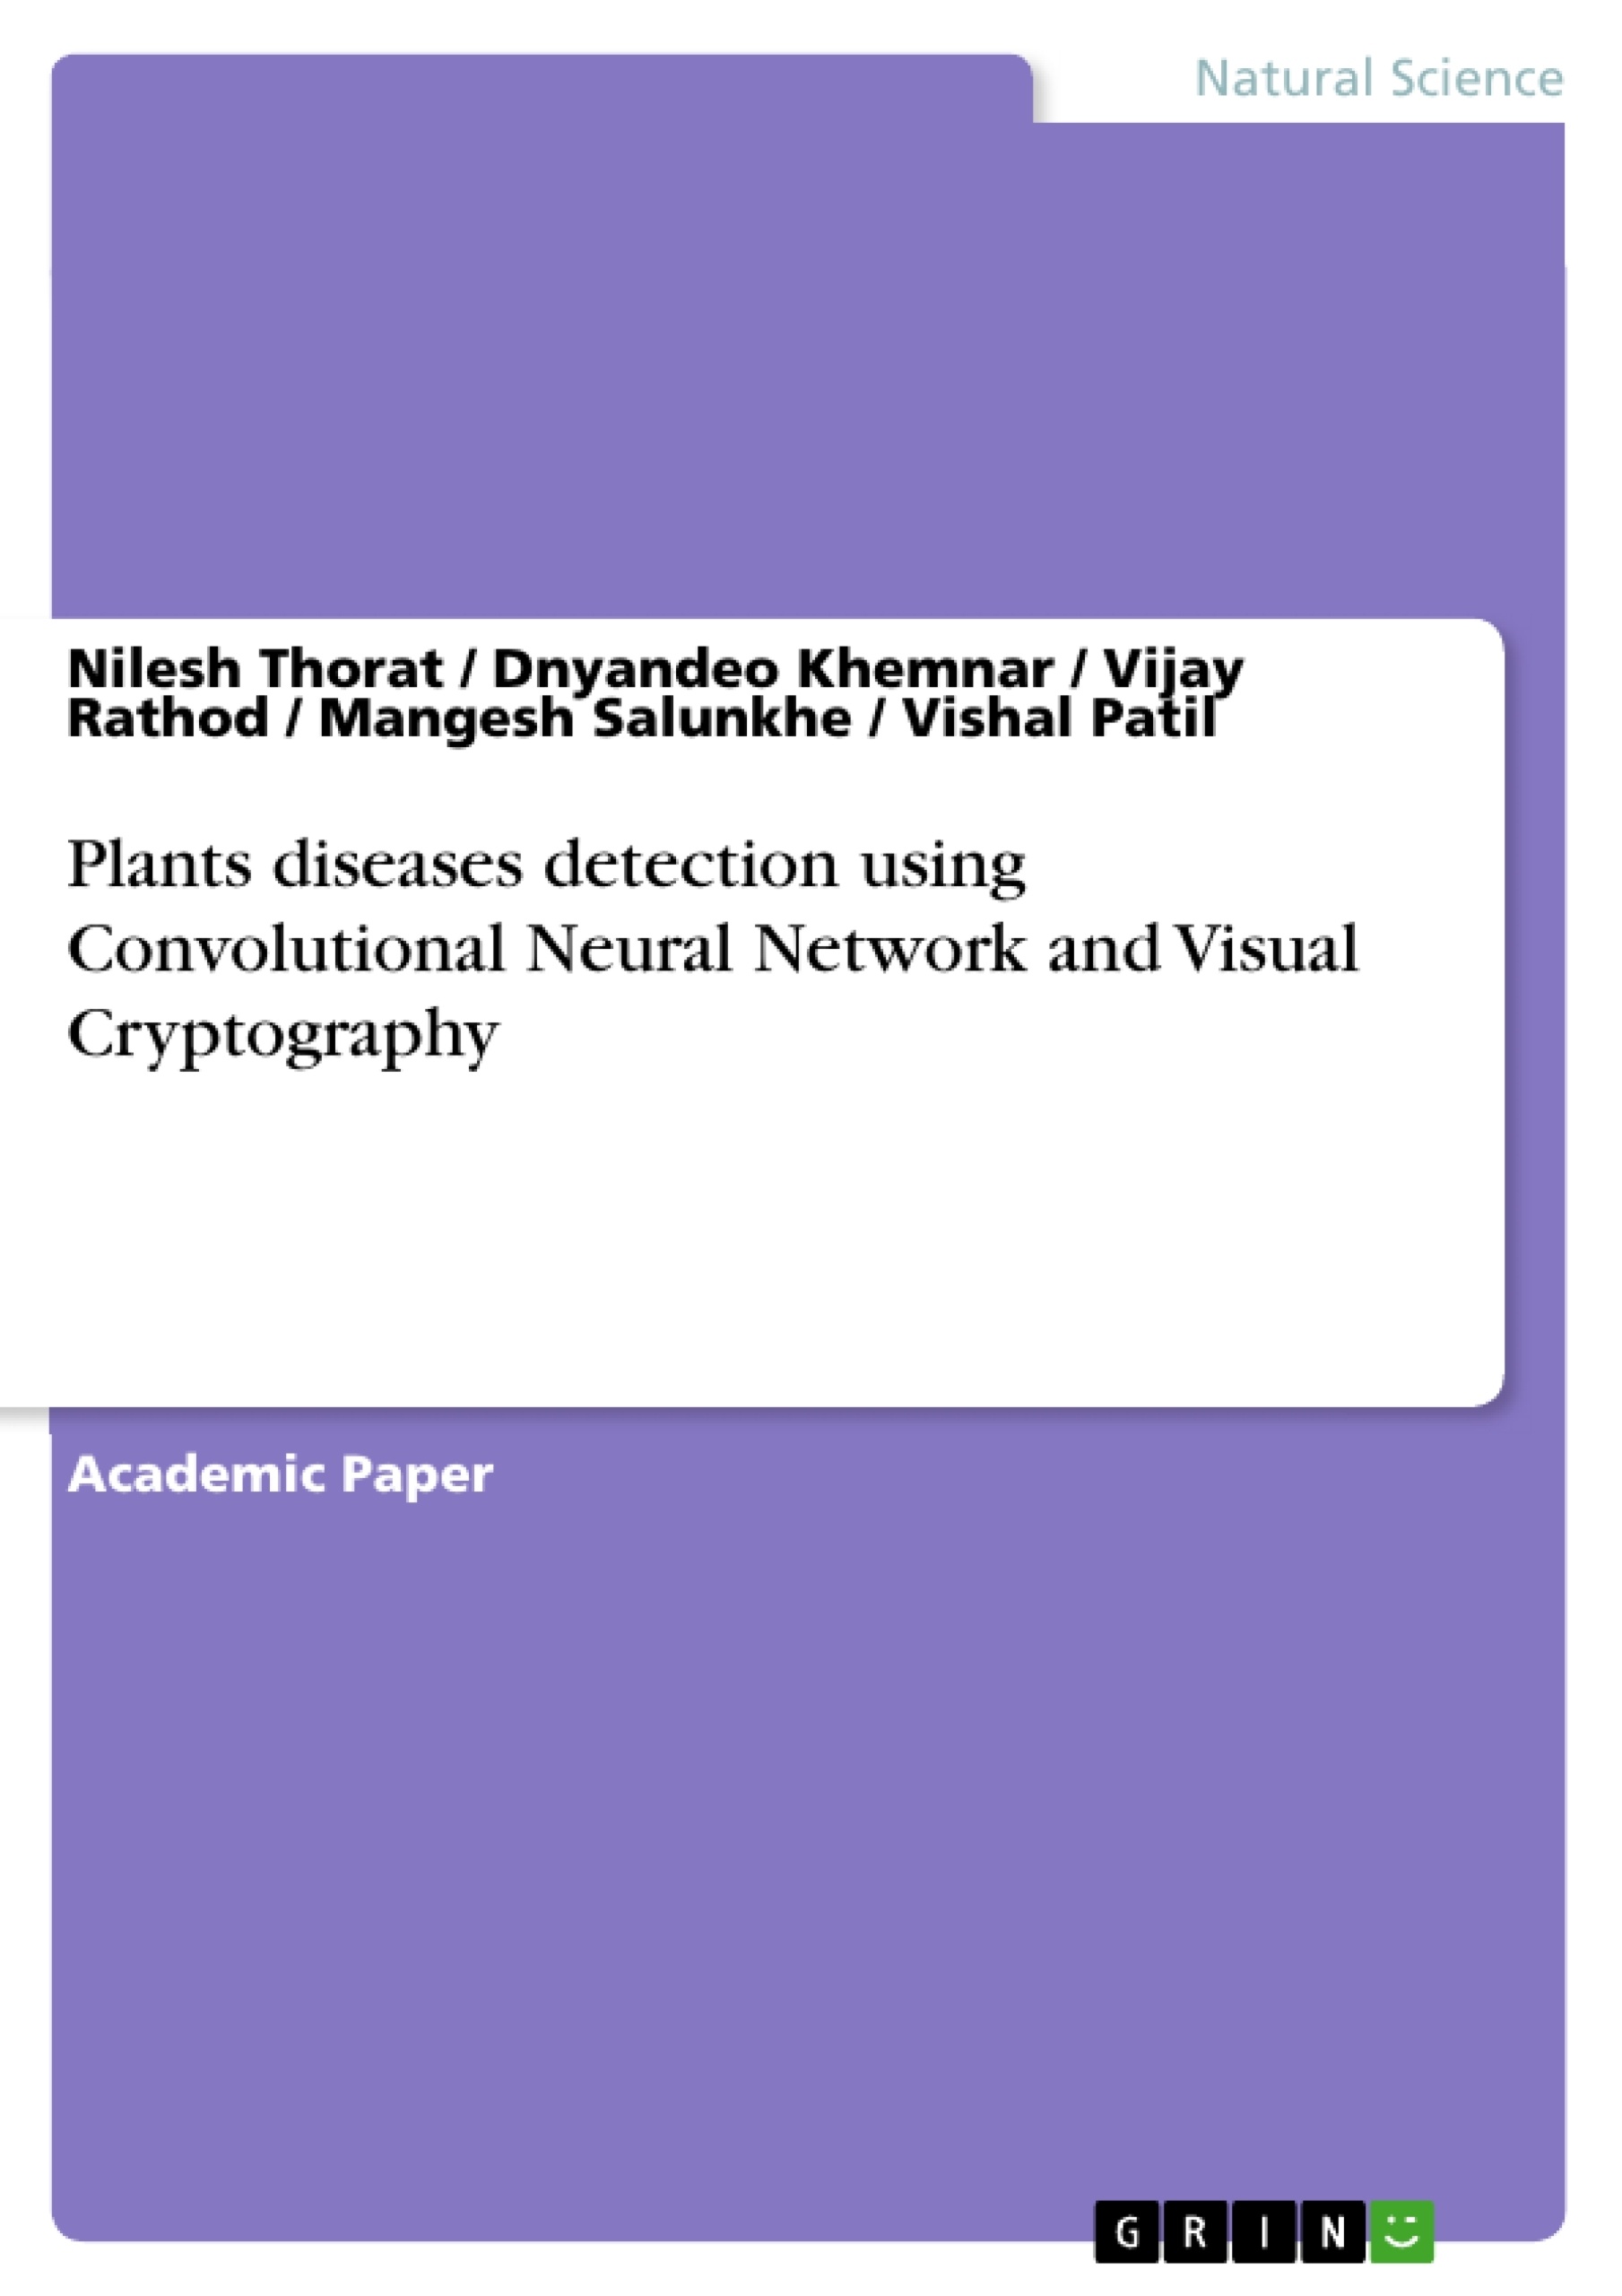 Title: Plants diseases detection using Convolutional Neural Network and Visual Cryptography